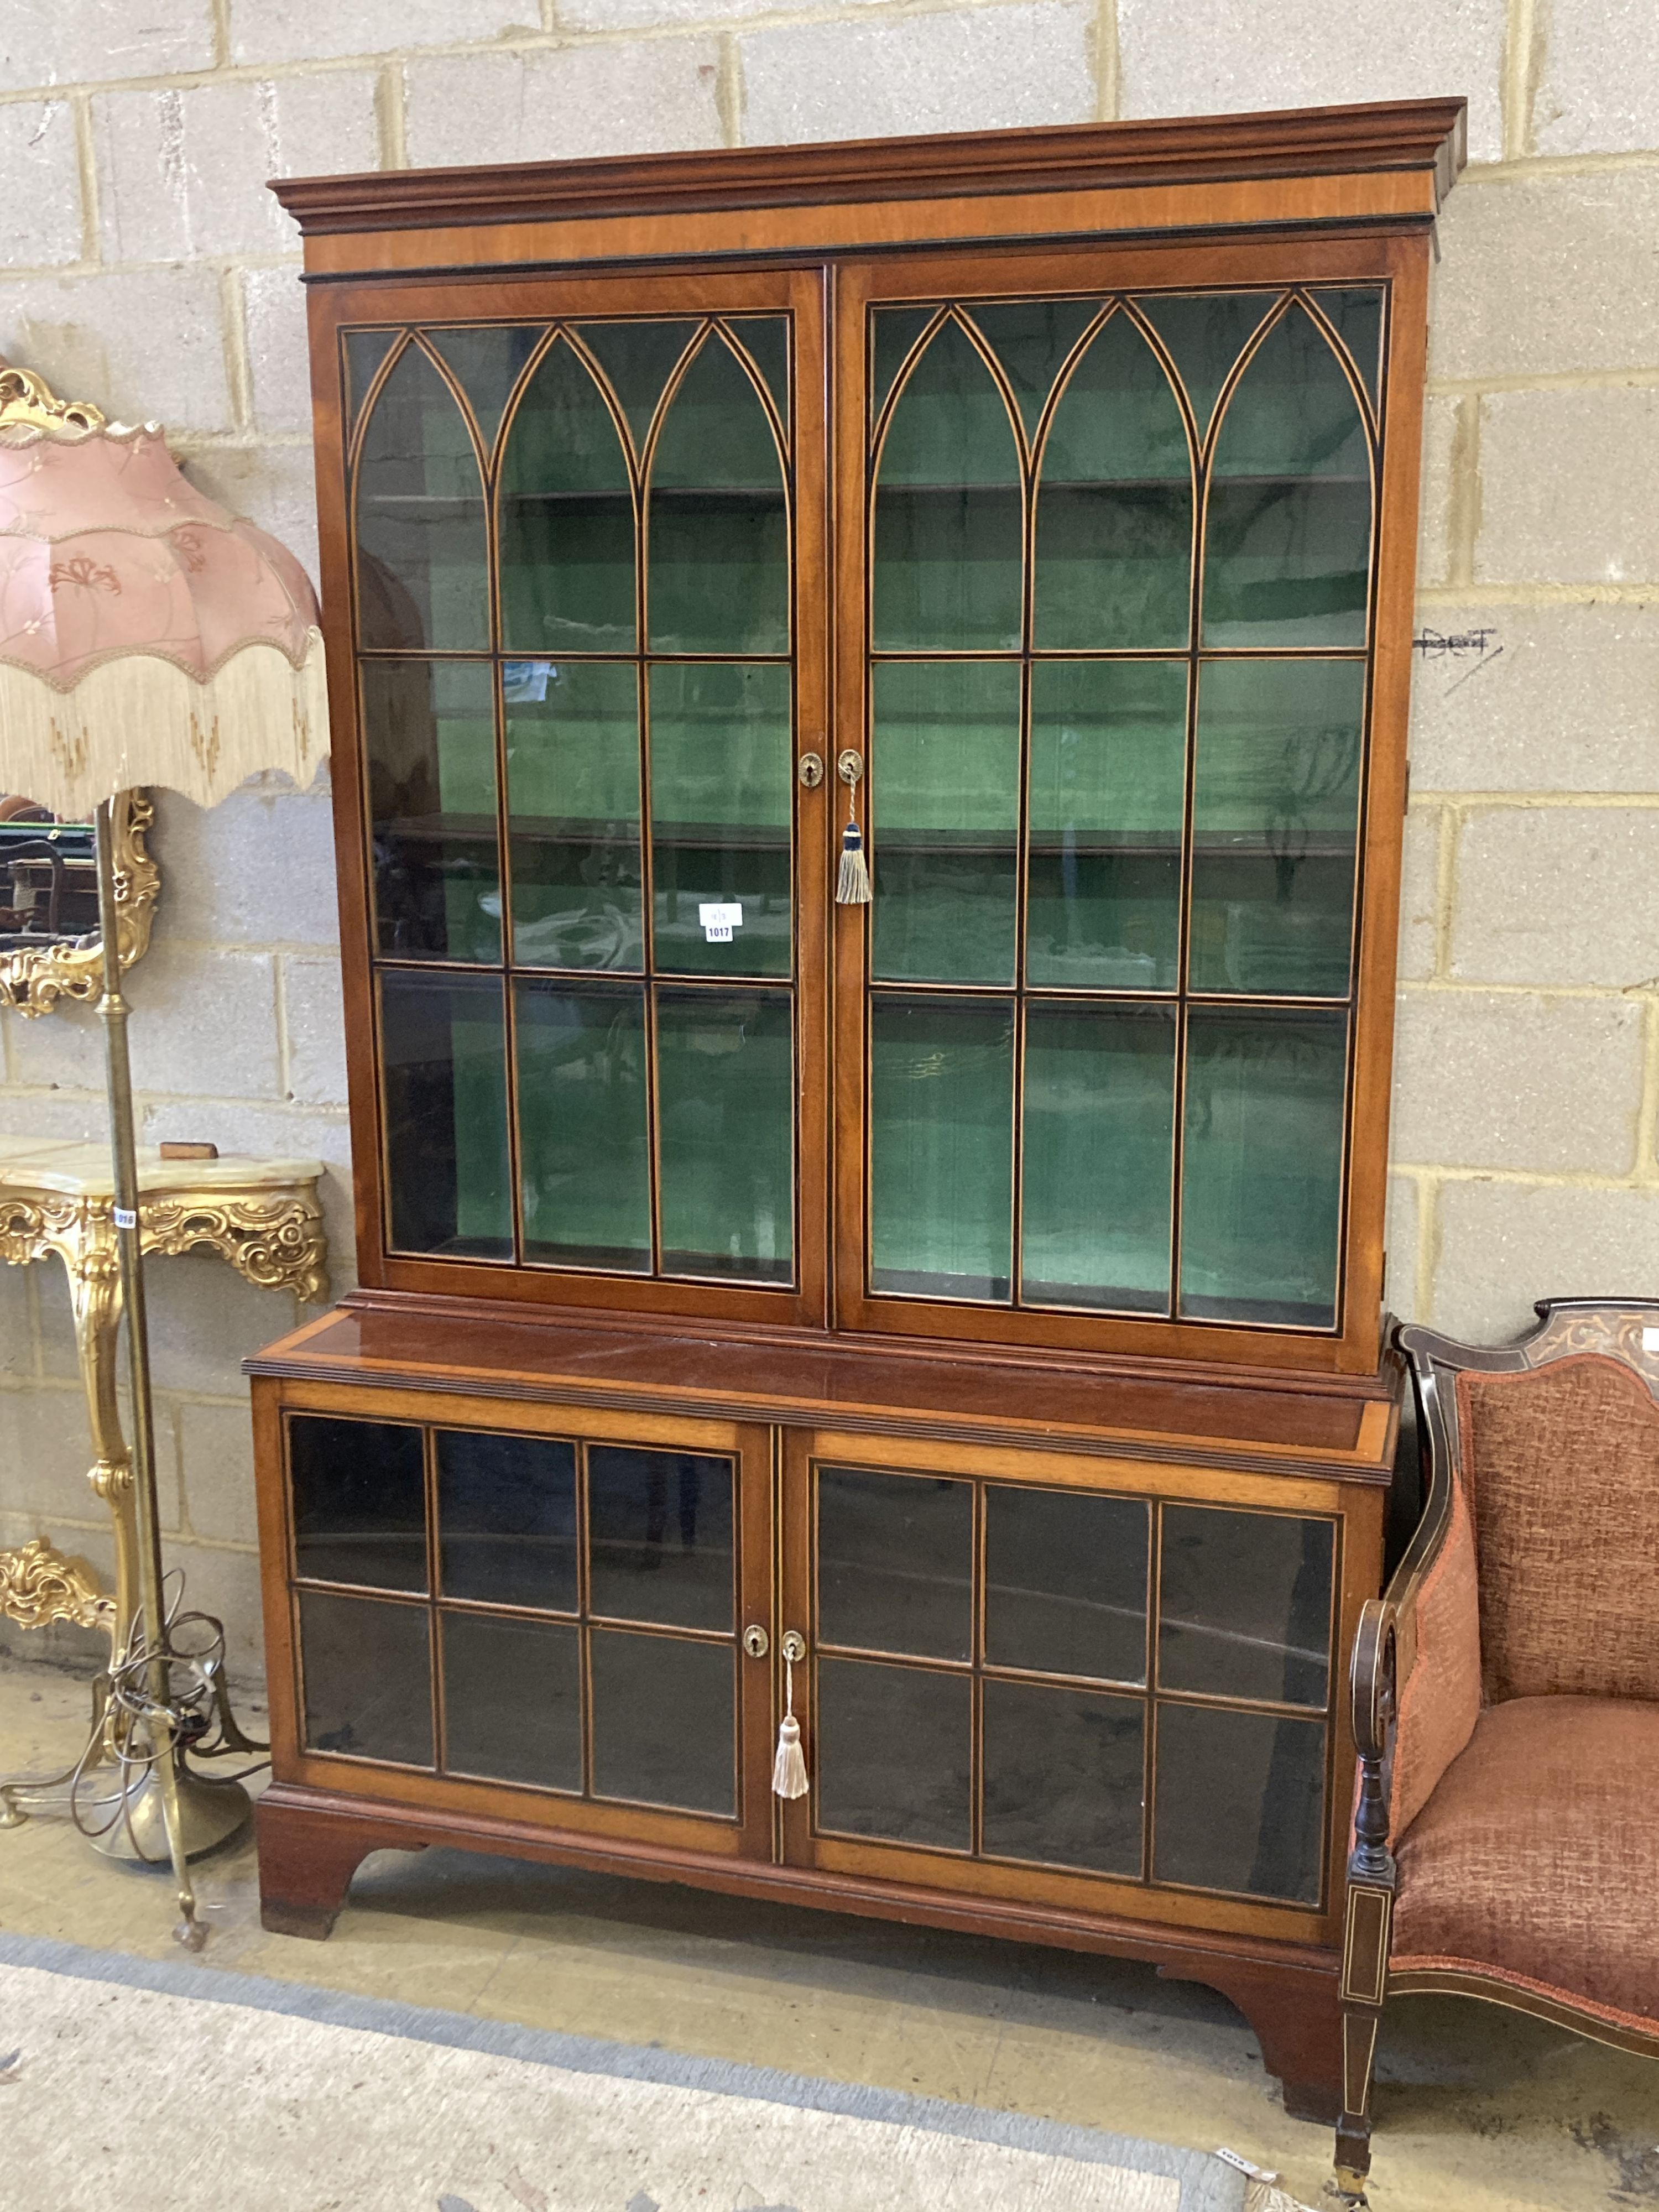 A George III style satinwood and ebony banded mahogany display cabinet, width 132cm, depth 50cm, height 208cm